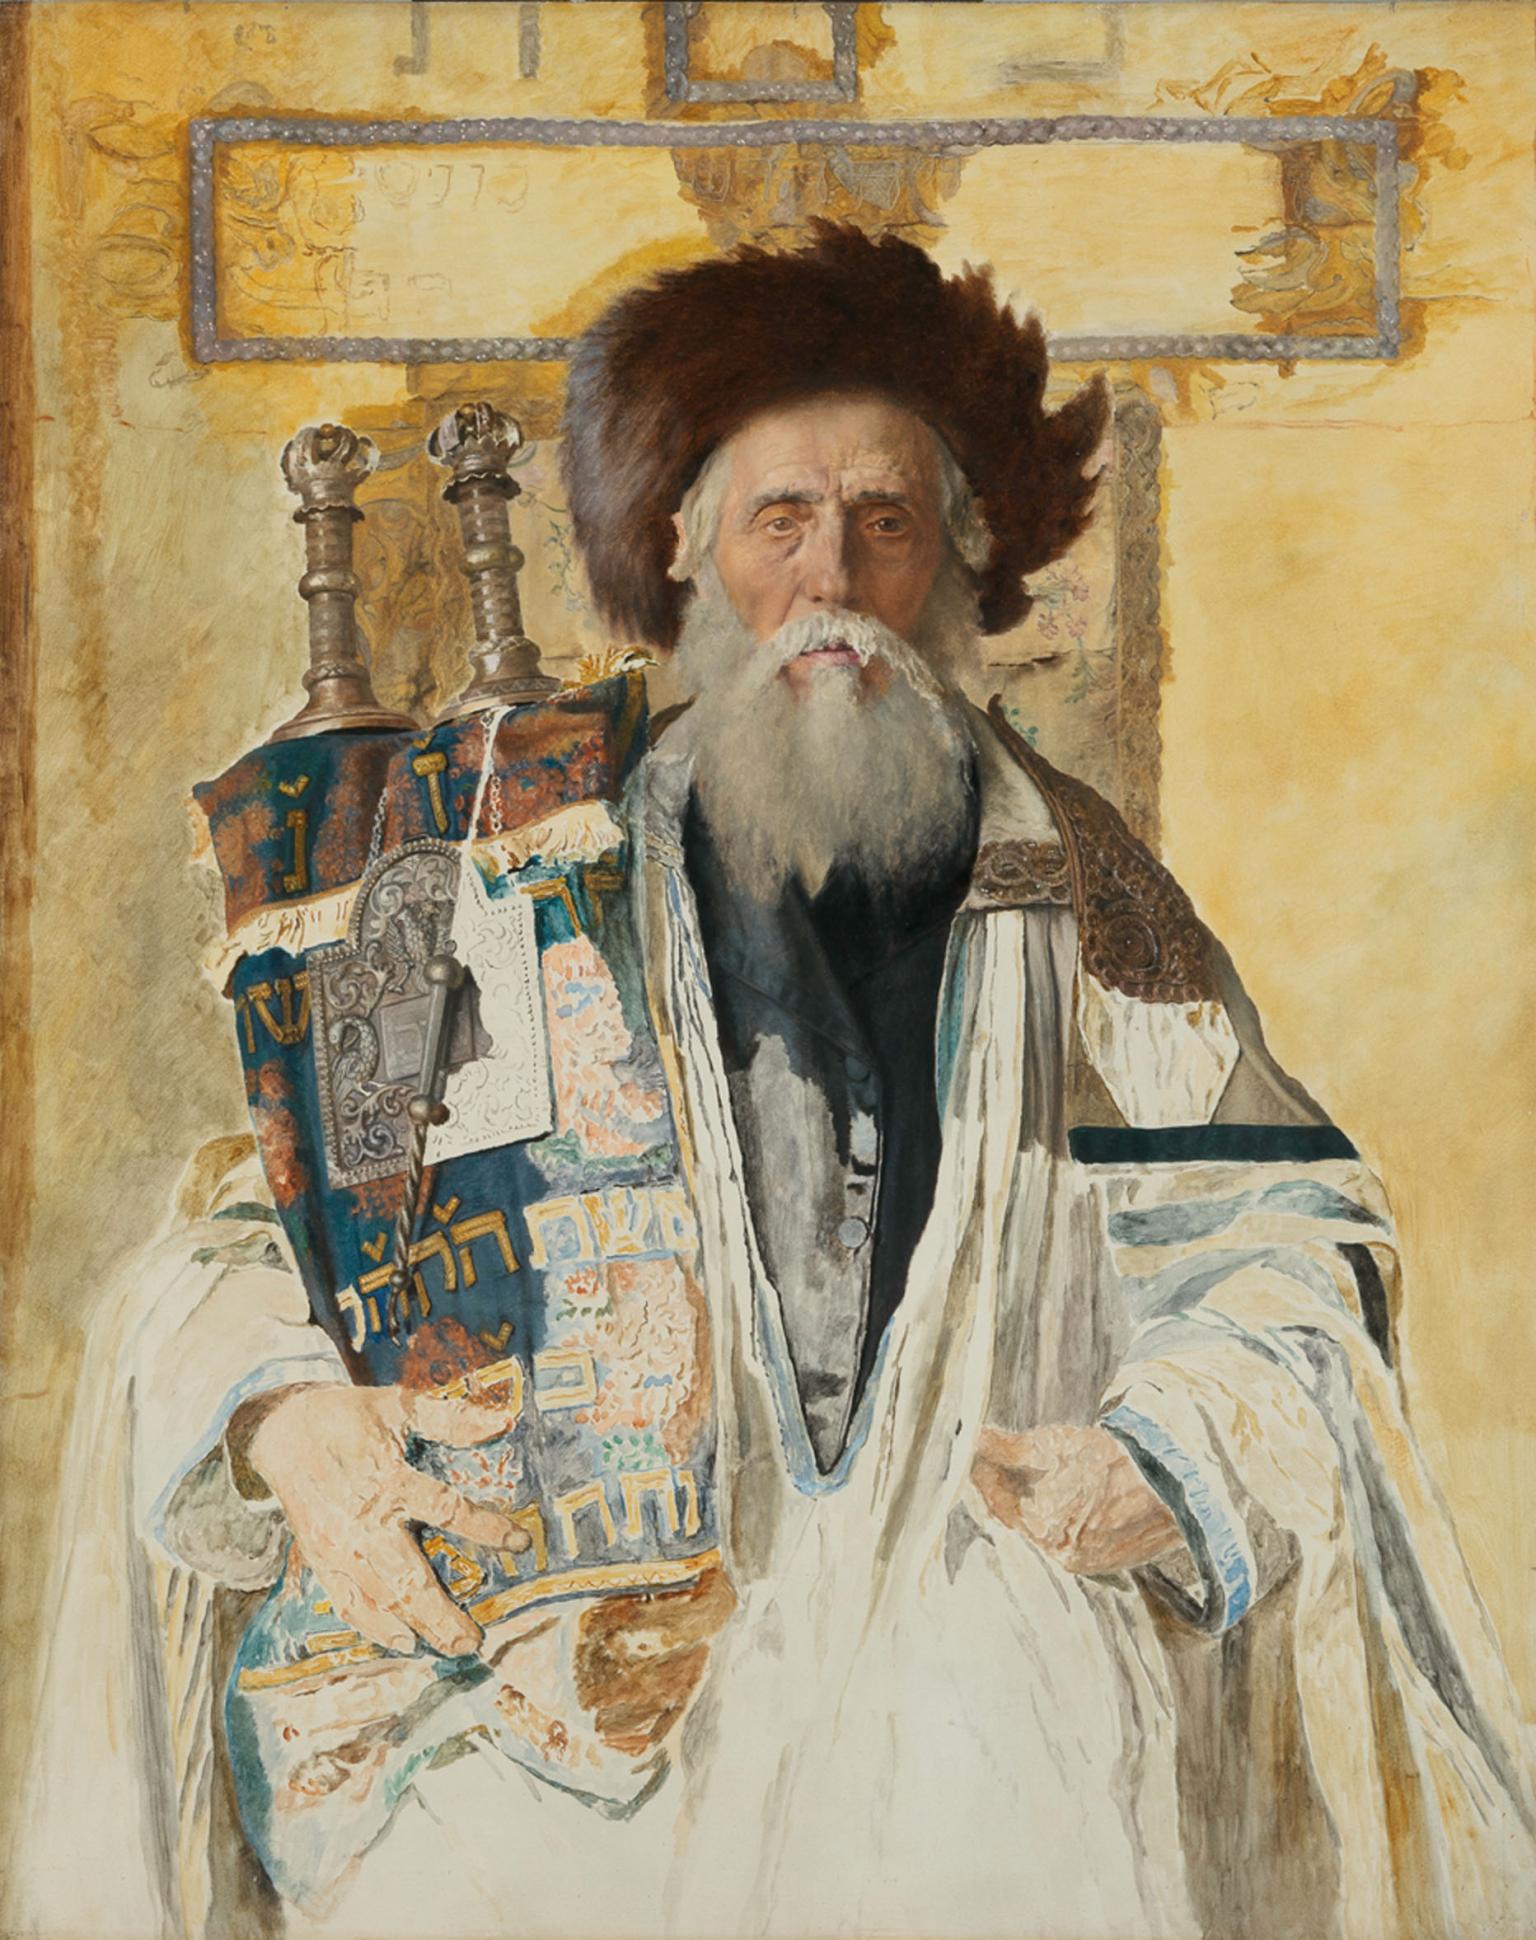 Oil painting of man in beard, furried hat, and prayer shawl looking forward and holding a Torah scroll.